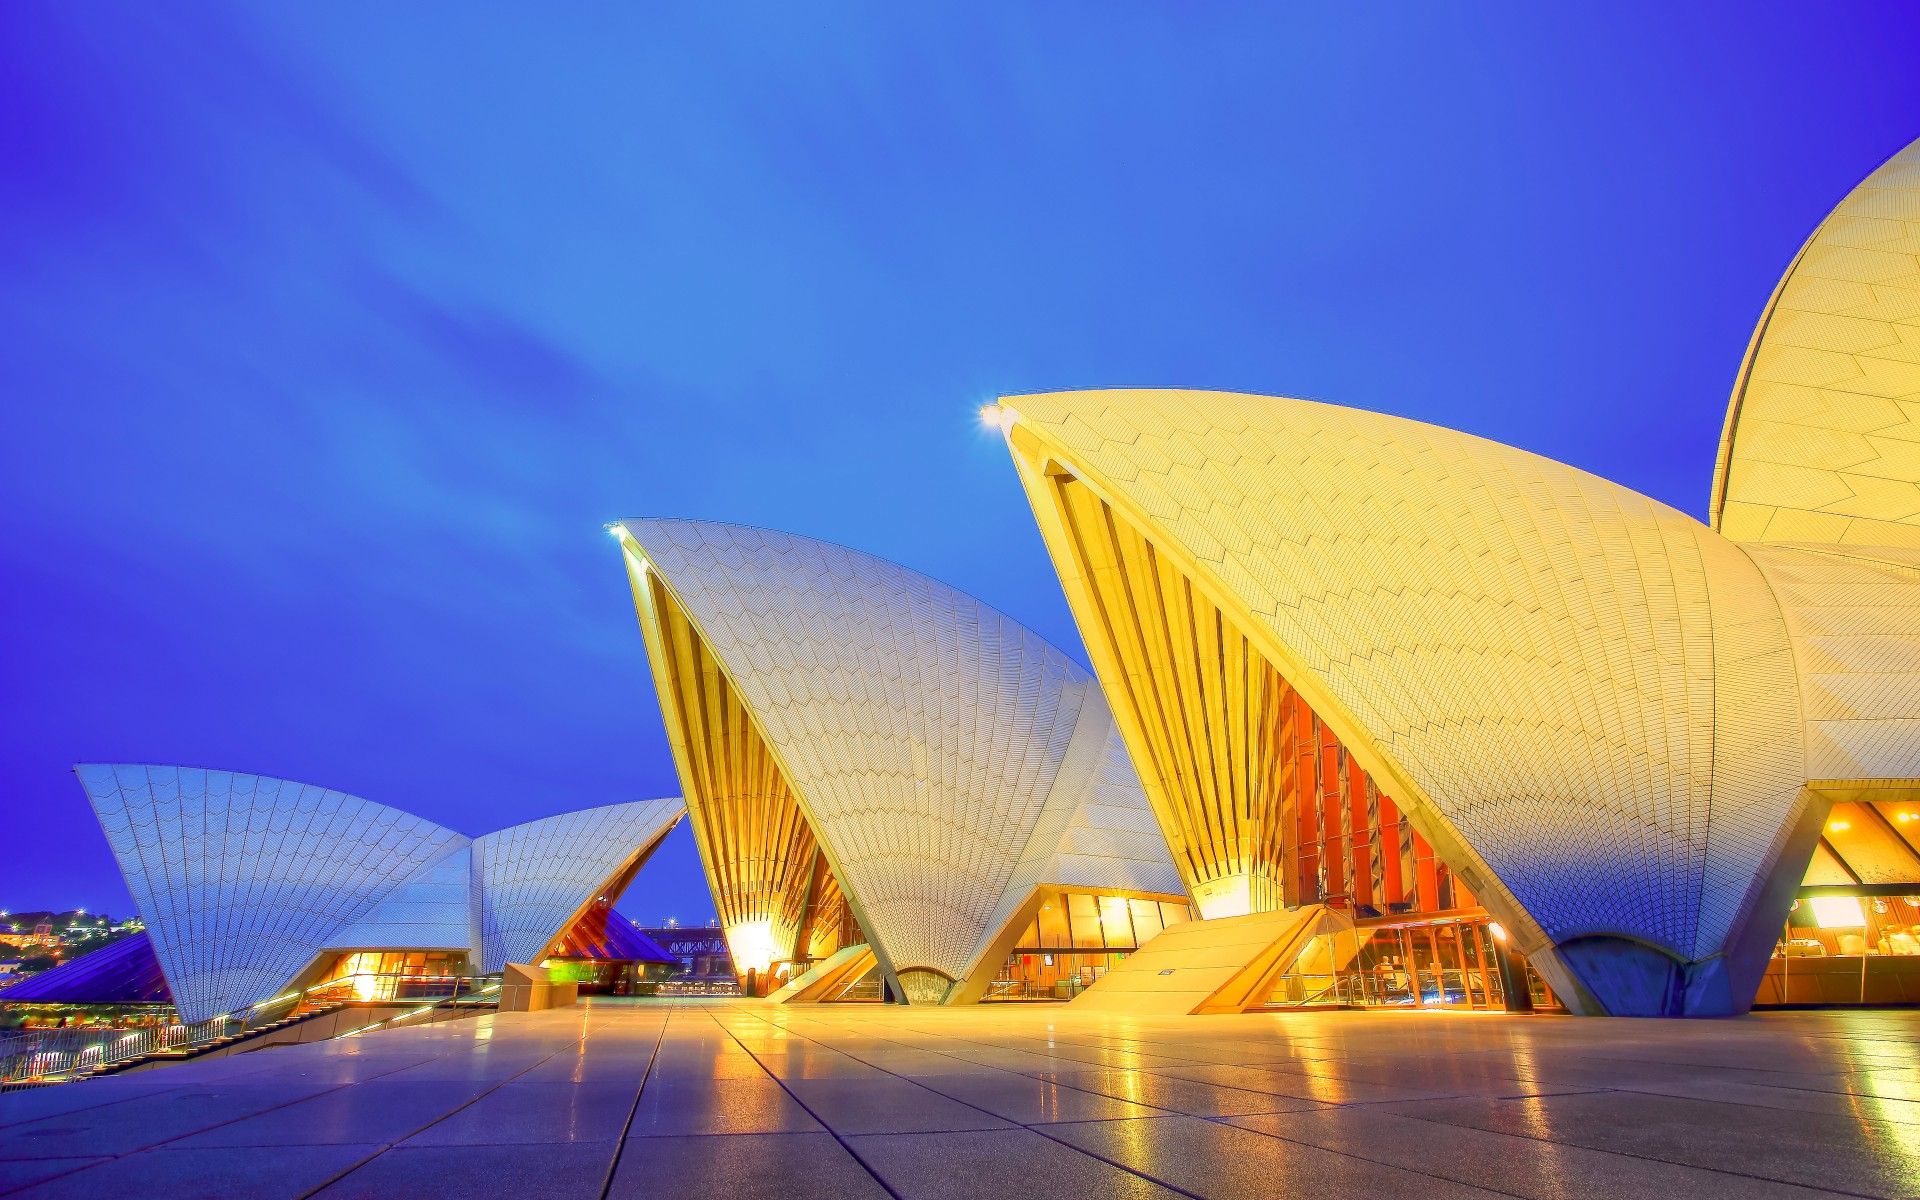 1920x1200 Wallpaper Sydney Opera House Australia Hd 4k World Wallpaper For Iphone Android Mobile And Desktop